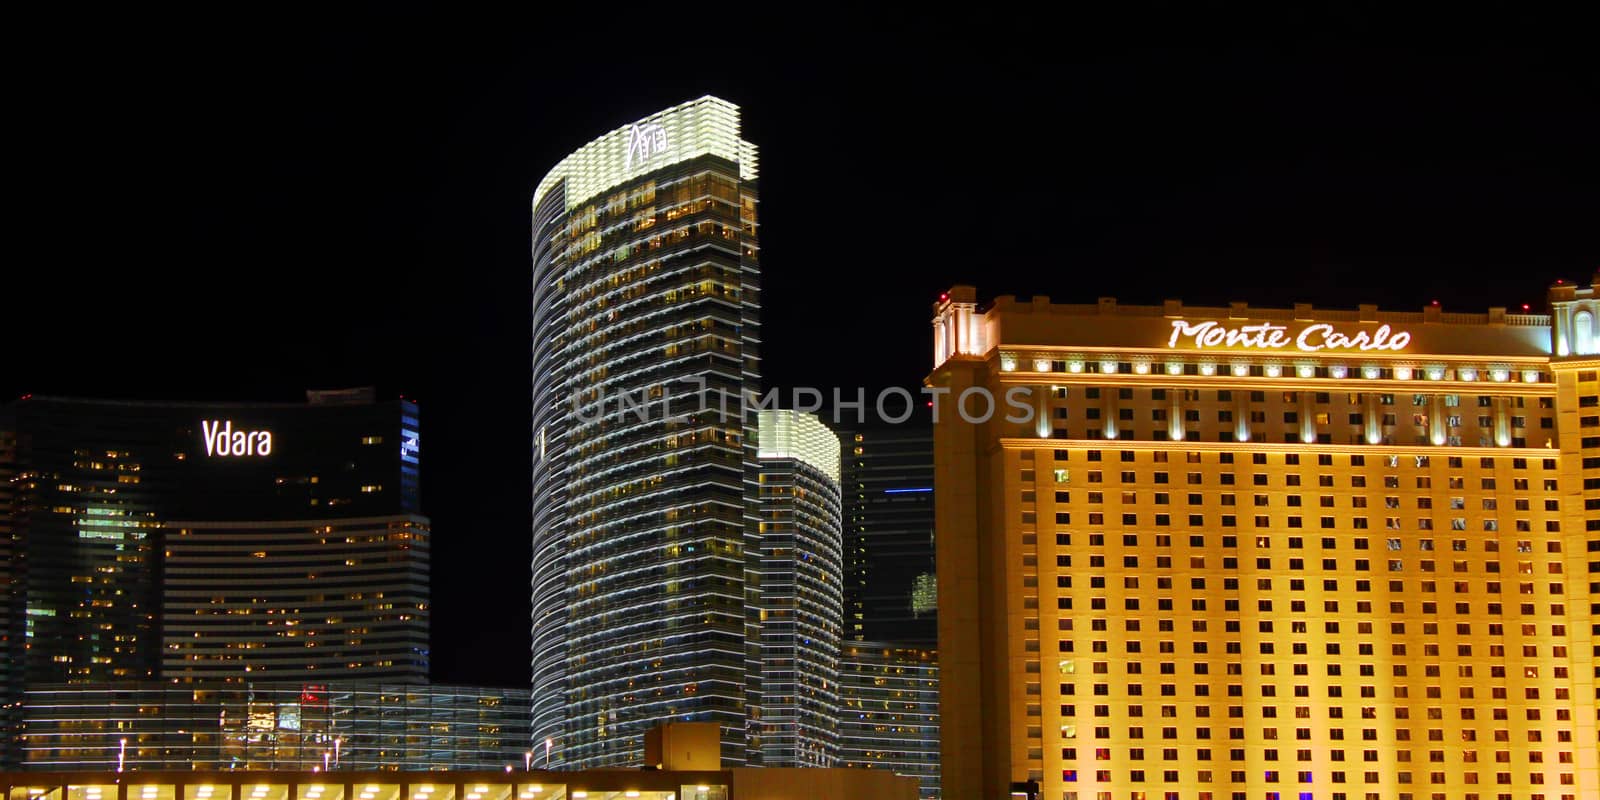 Las Vegas, USA - May 23, 2012: Famous hotels of the Las Vegas Strip in Nevada.  The Strip is about 4 miles long and seen here are the Vdara, the Aria, and the Monte Carlo.